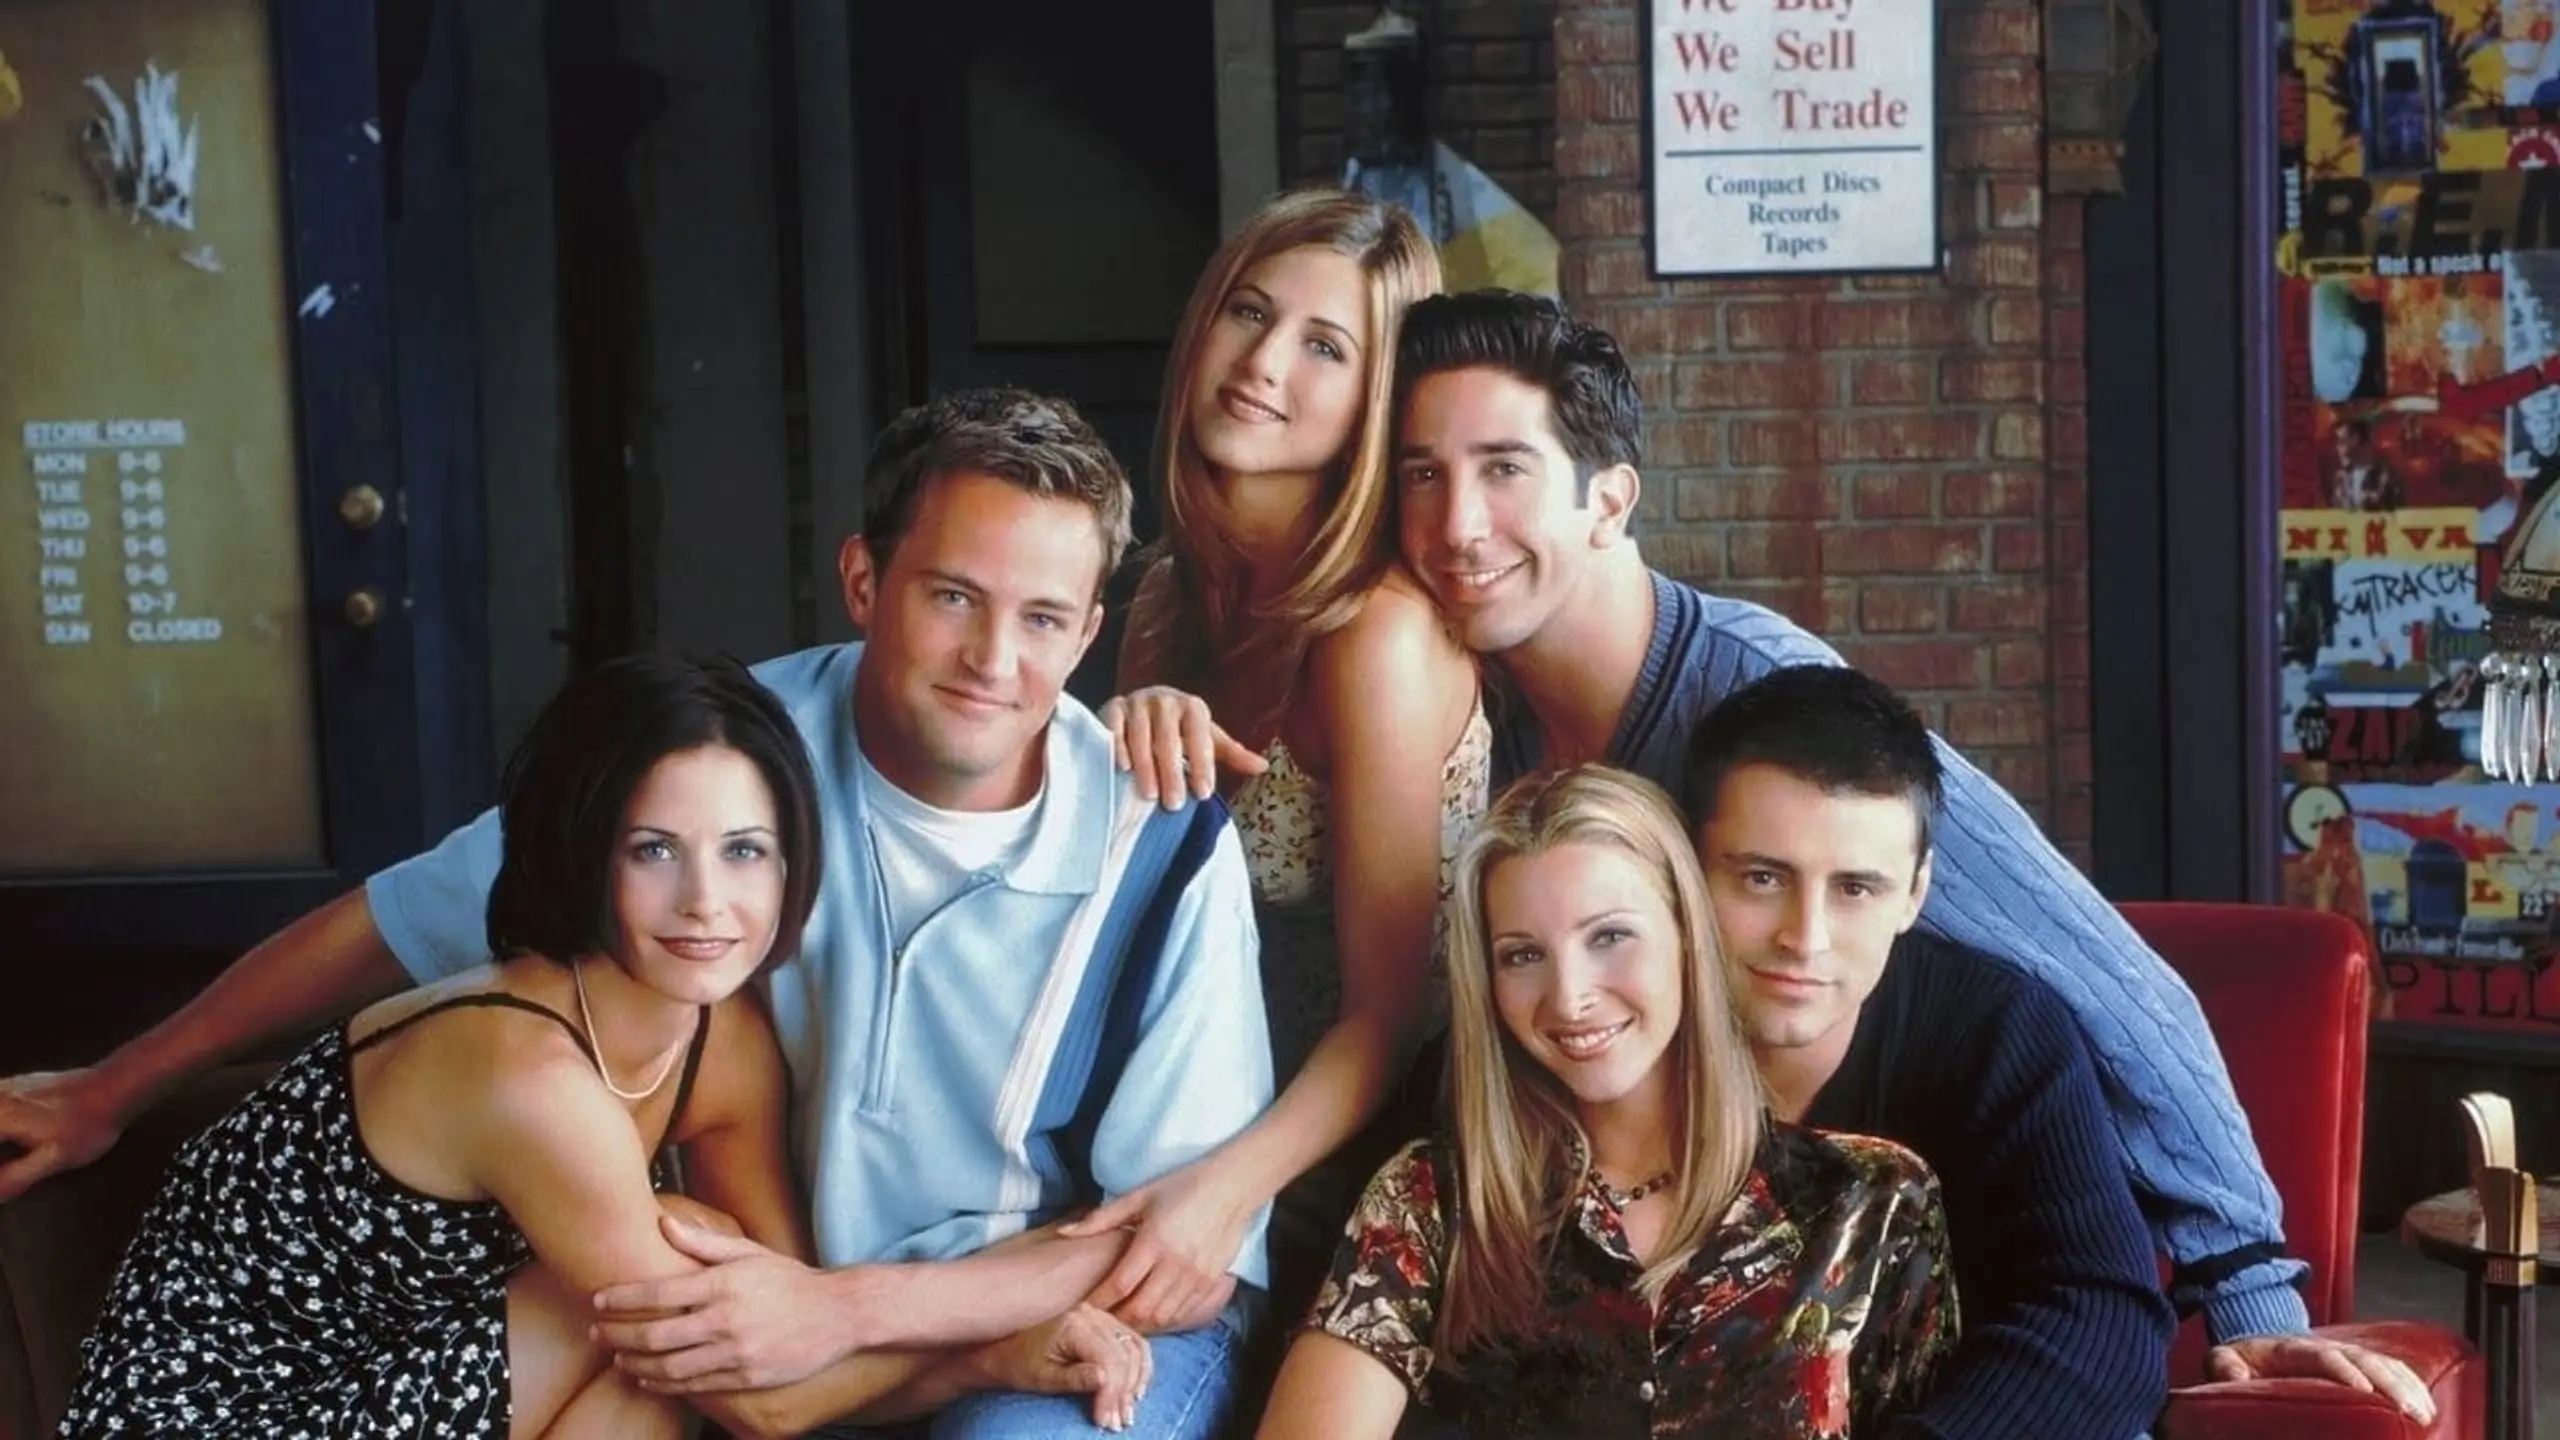 Friends 25th: The One with the Anniversary